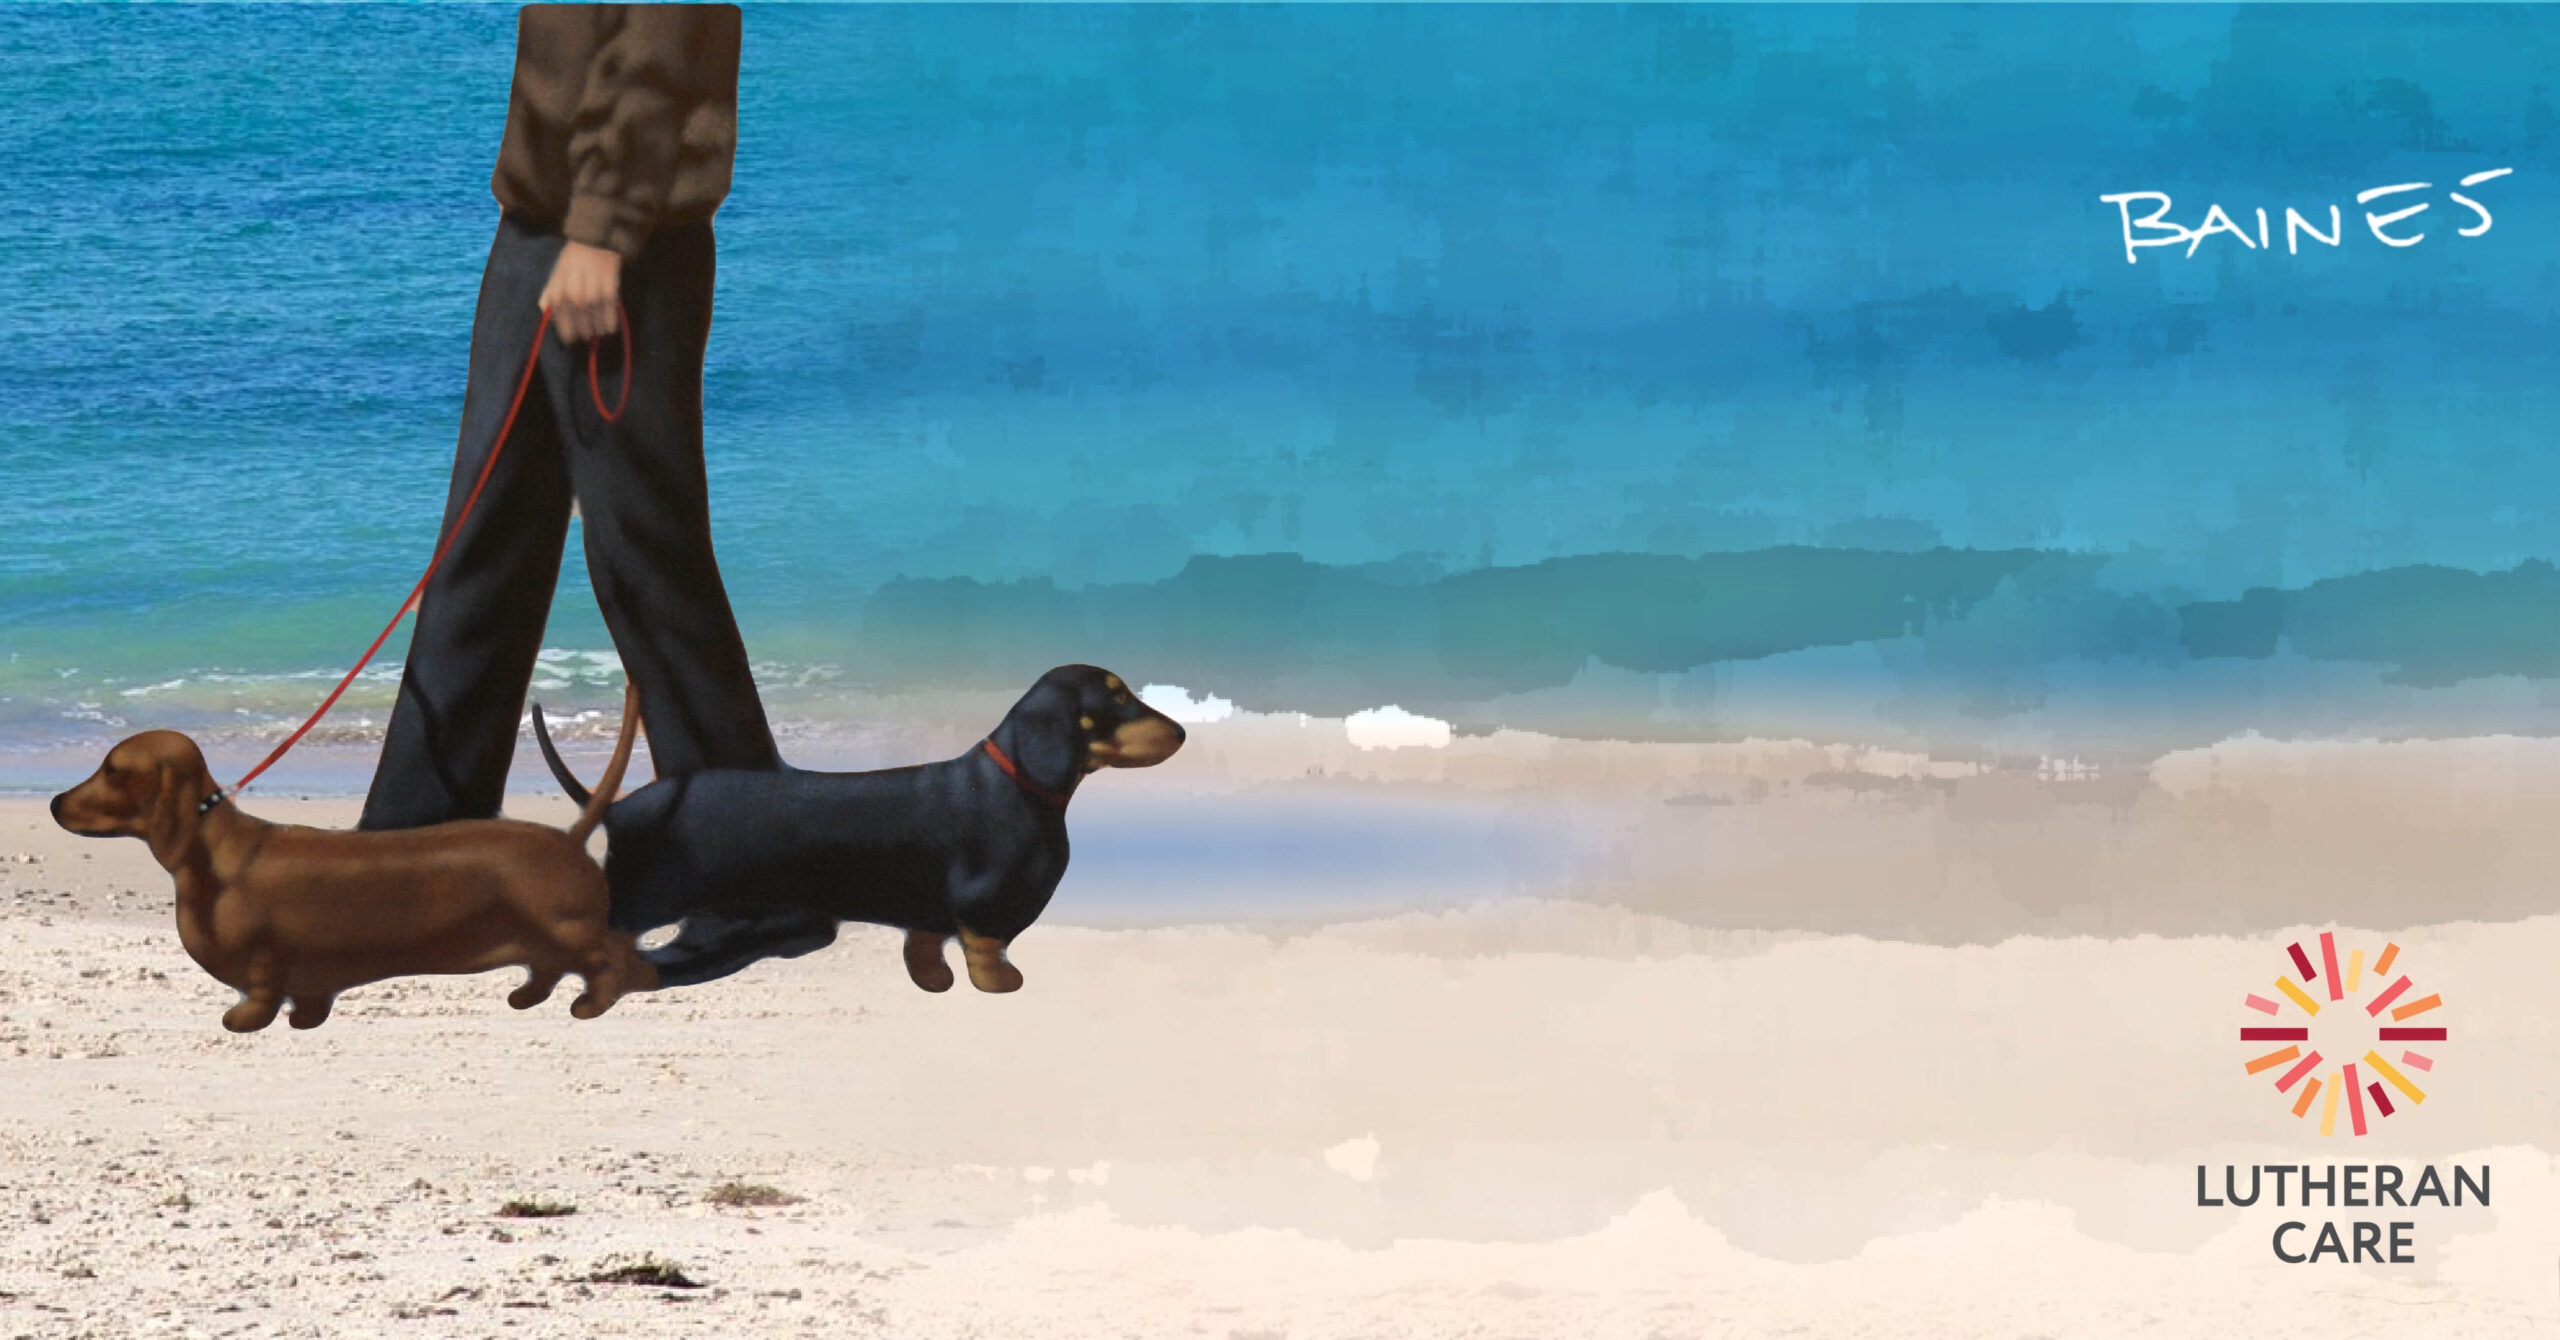 Andrew Baines artwork of sausage dogs on a beach with owner. Baines signature and the Lutheran Care logo appear on the right hand side of image.